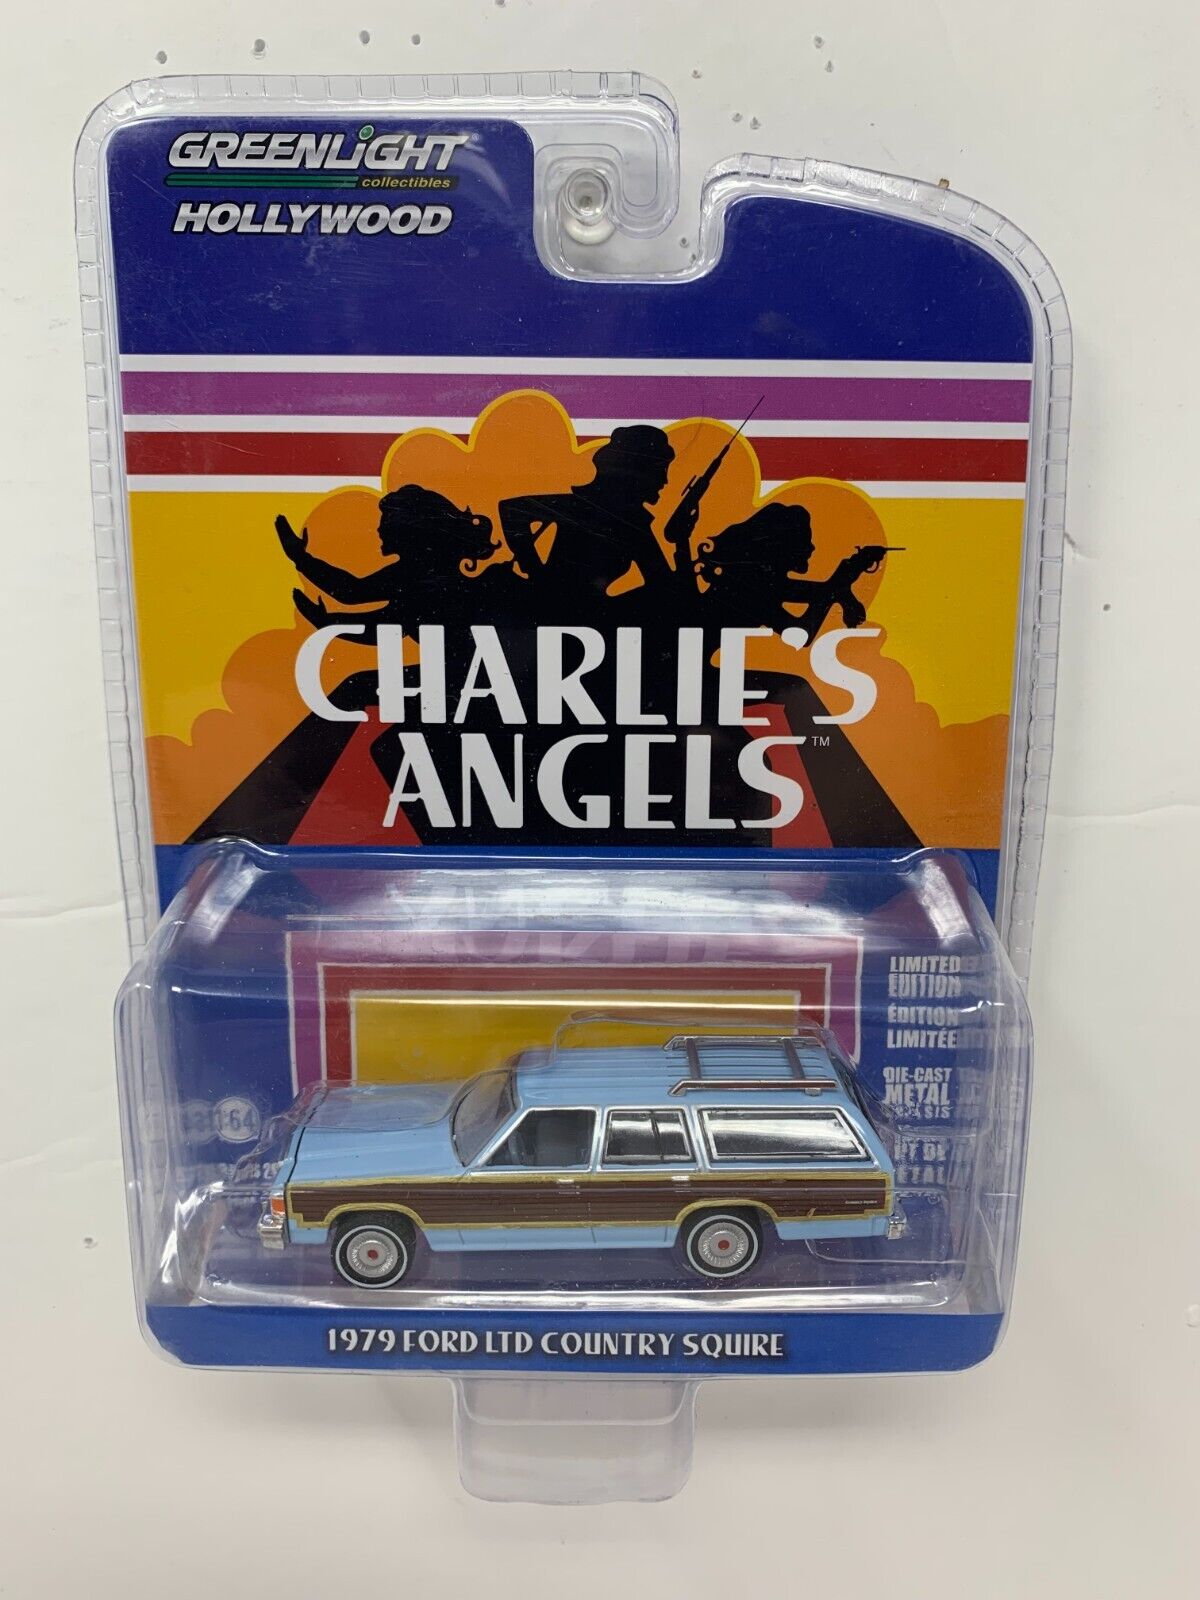 Greenlight Hollywood Charlie's Angels 1979 Ford LTD Country Squire 1:64 Diecast